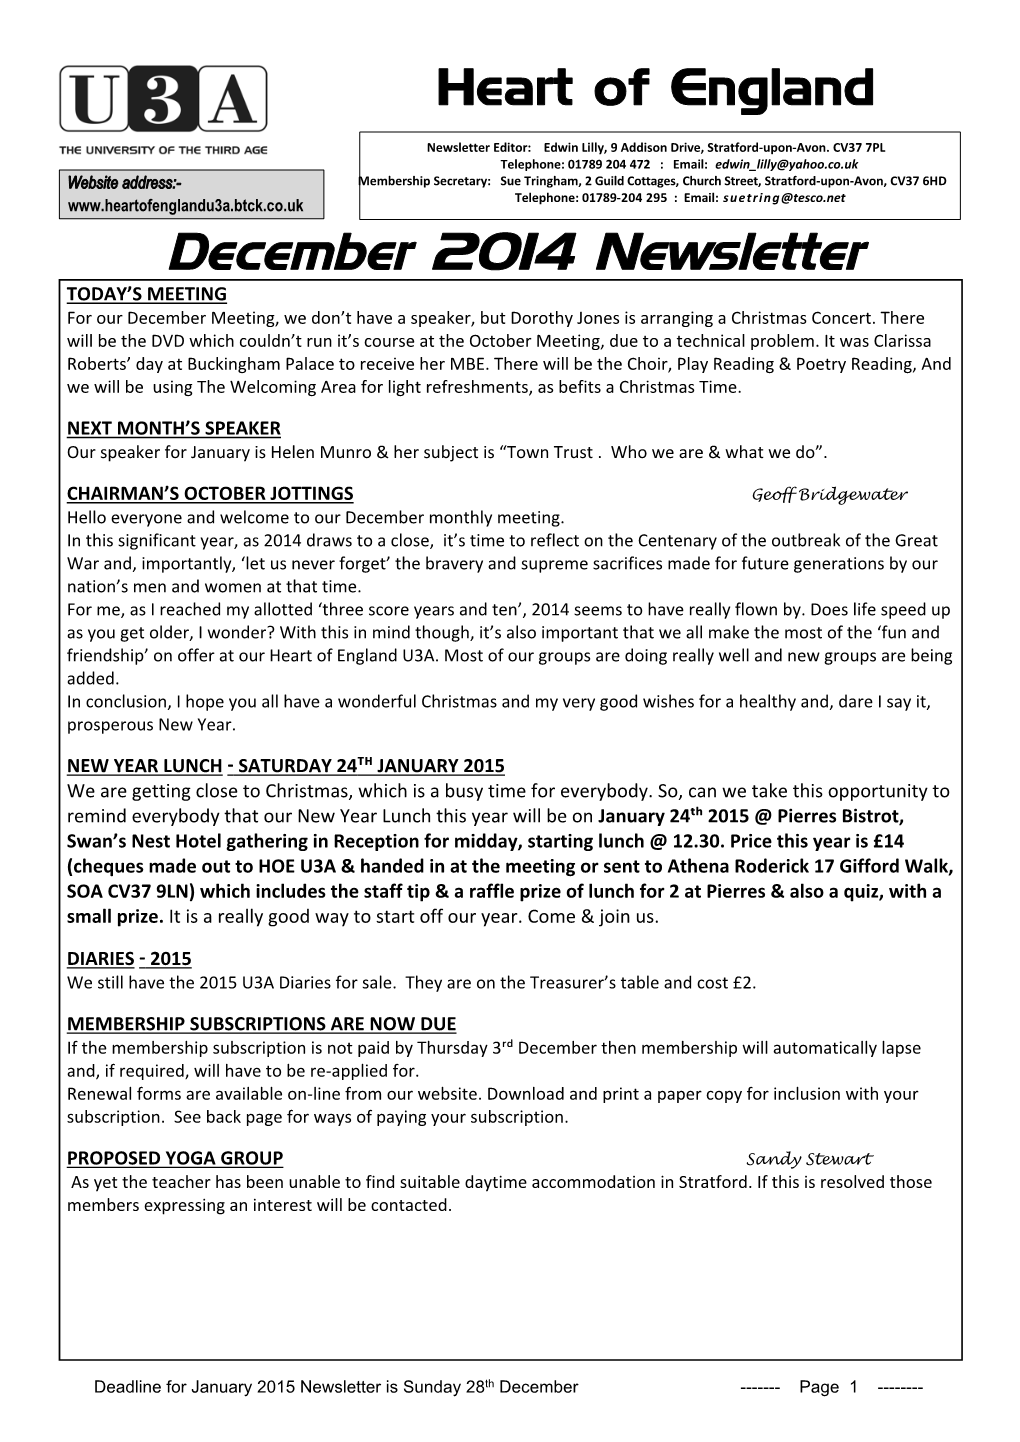 December 2014 Newsletter TODAY’S MEETING for Our December Meeting, We Don’T Have a Speaker, but Dorothy Jones Is Arranging a Christmas Concert